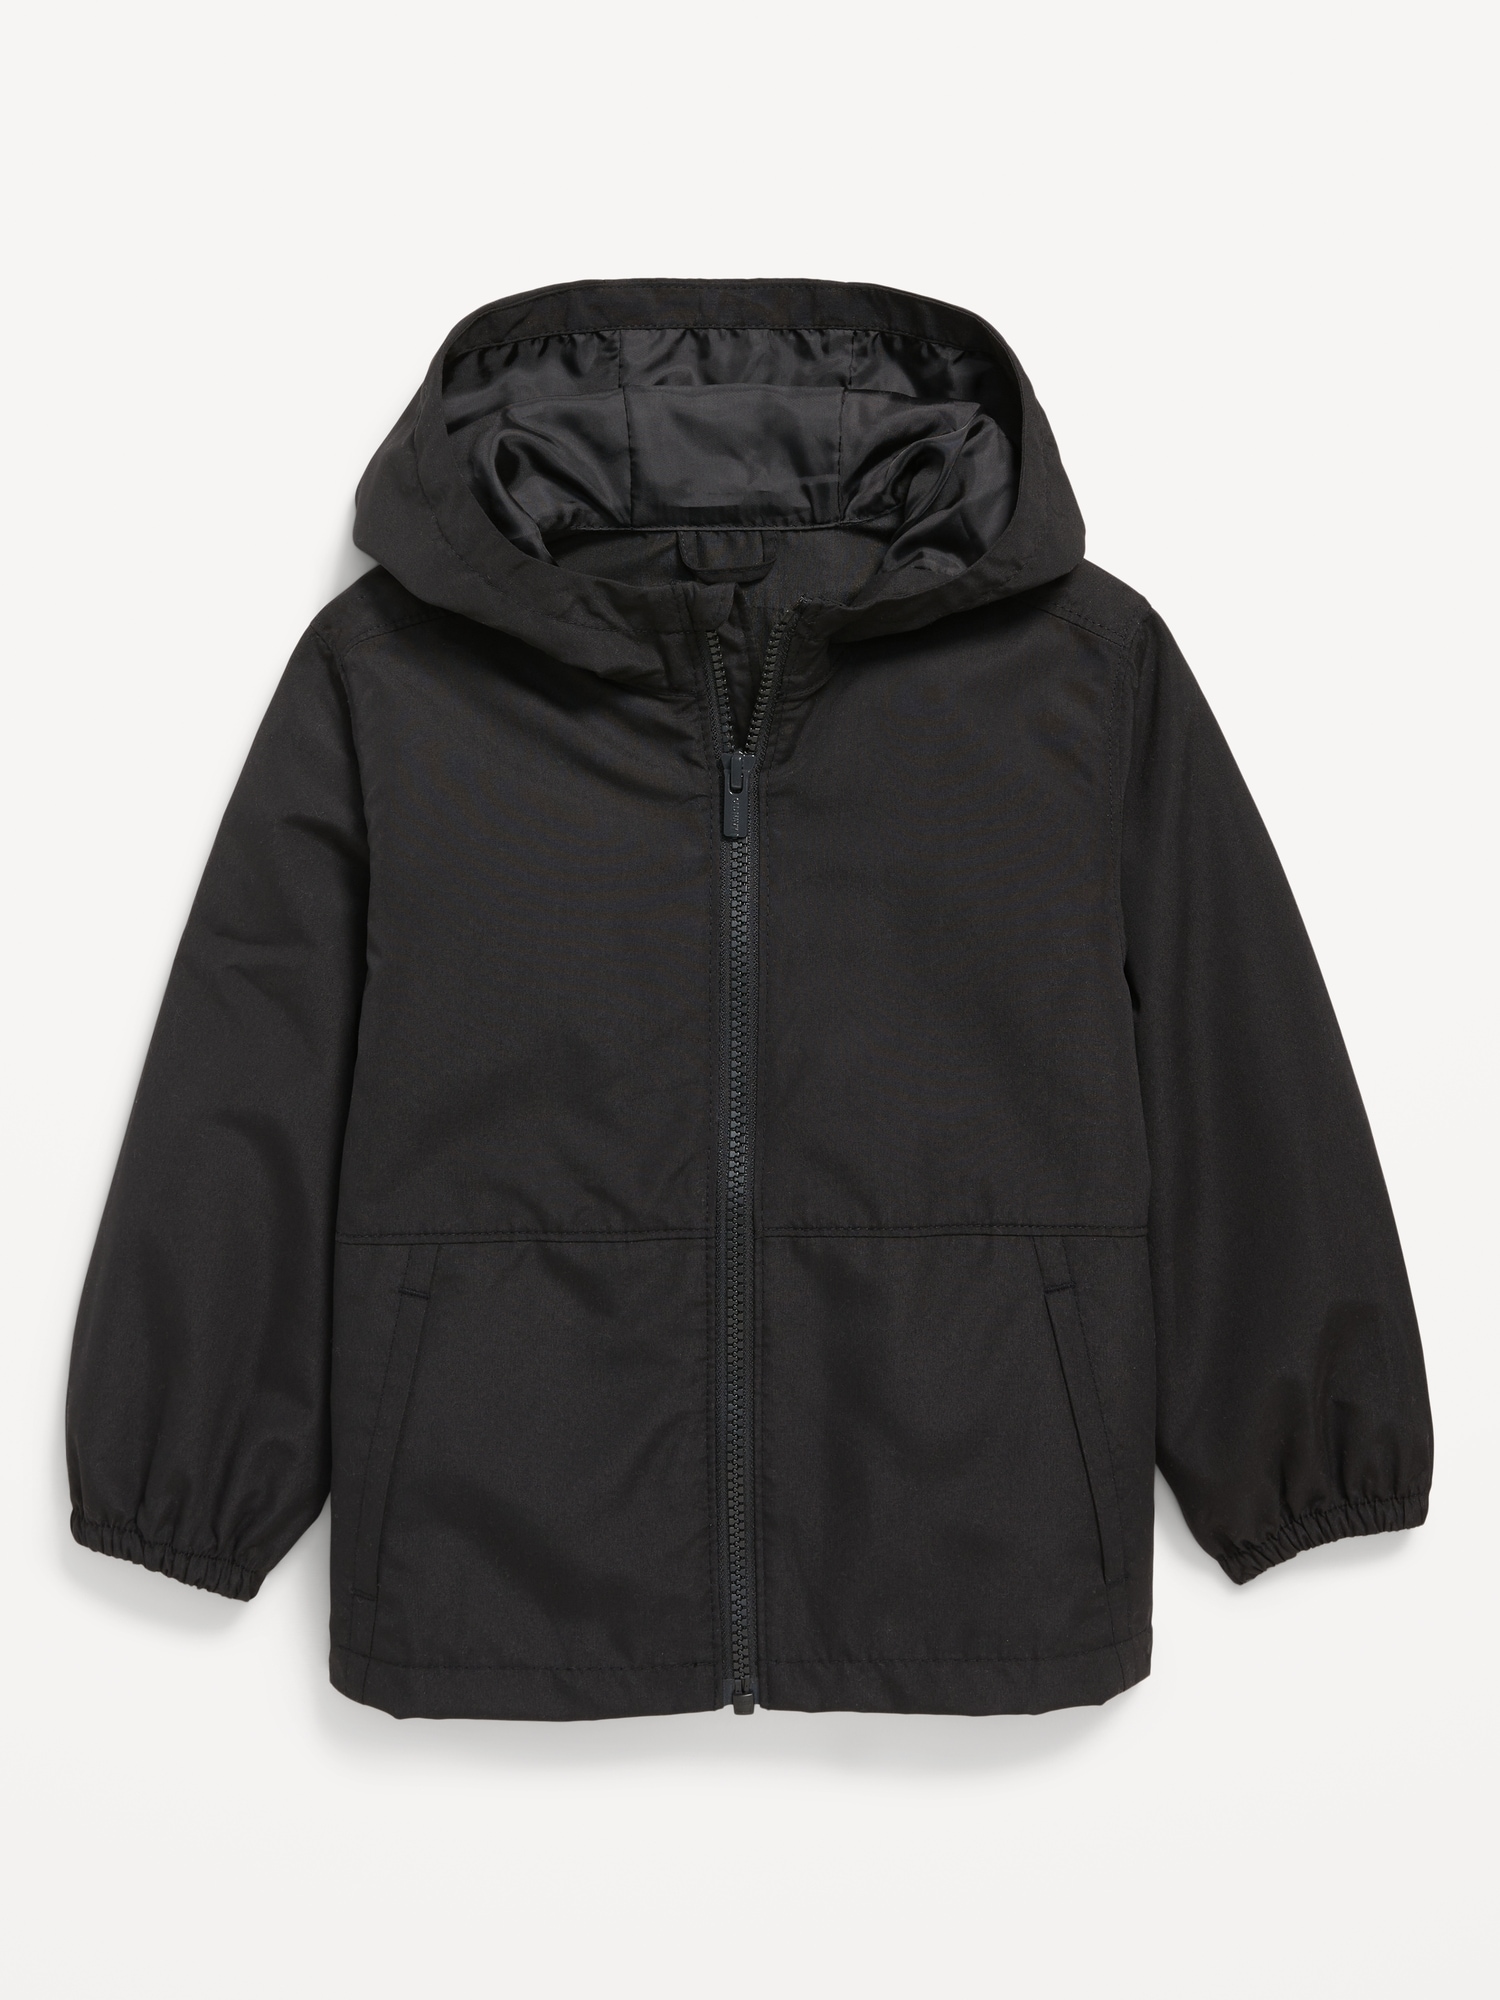 Water-Resistant Hooded Jacket for Toddler Boys